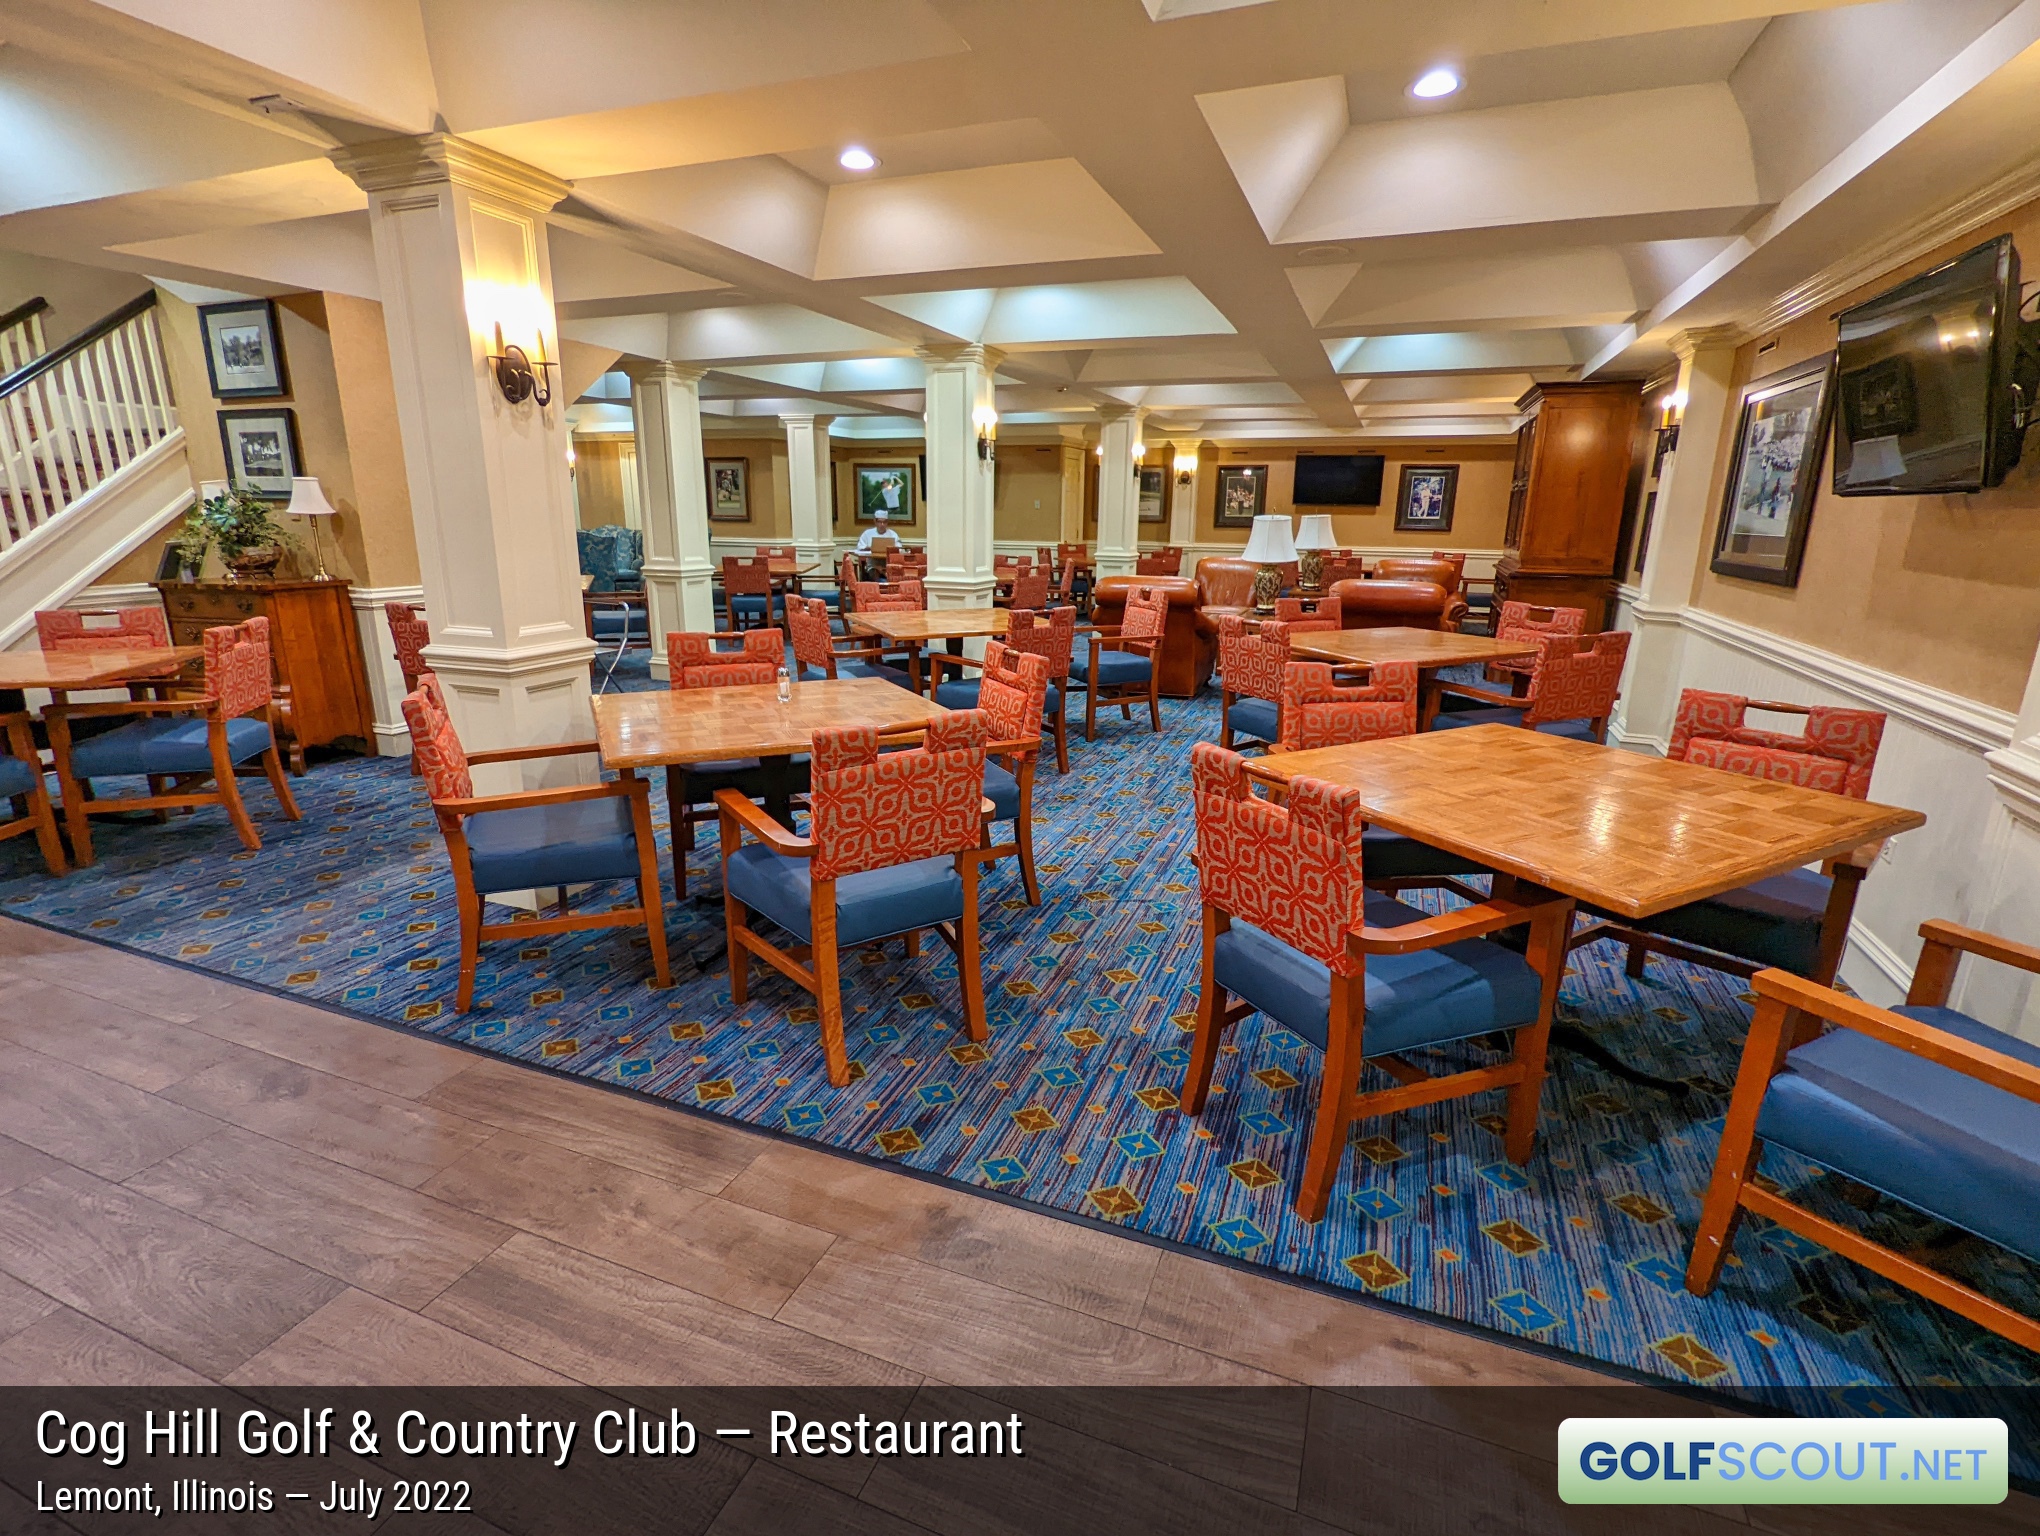 Photo of the restaurant at Cog Hill Course #1 in Lemont, Illinois. The basement dining area in the main clubhouse.